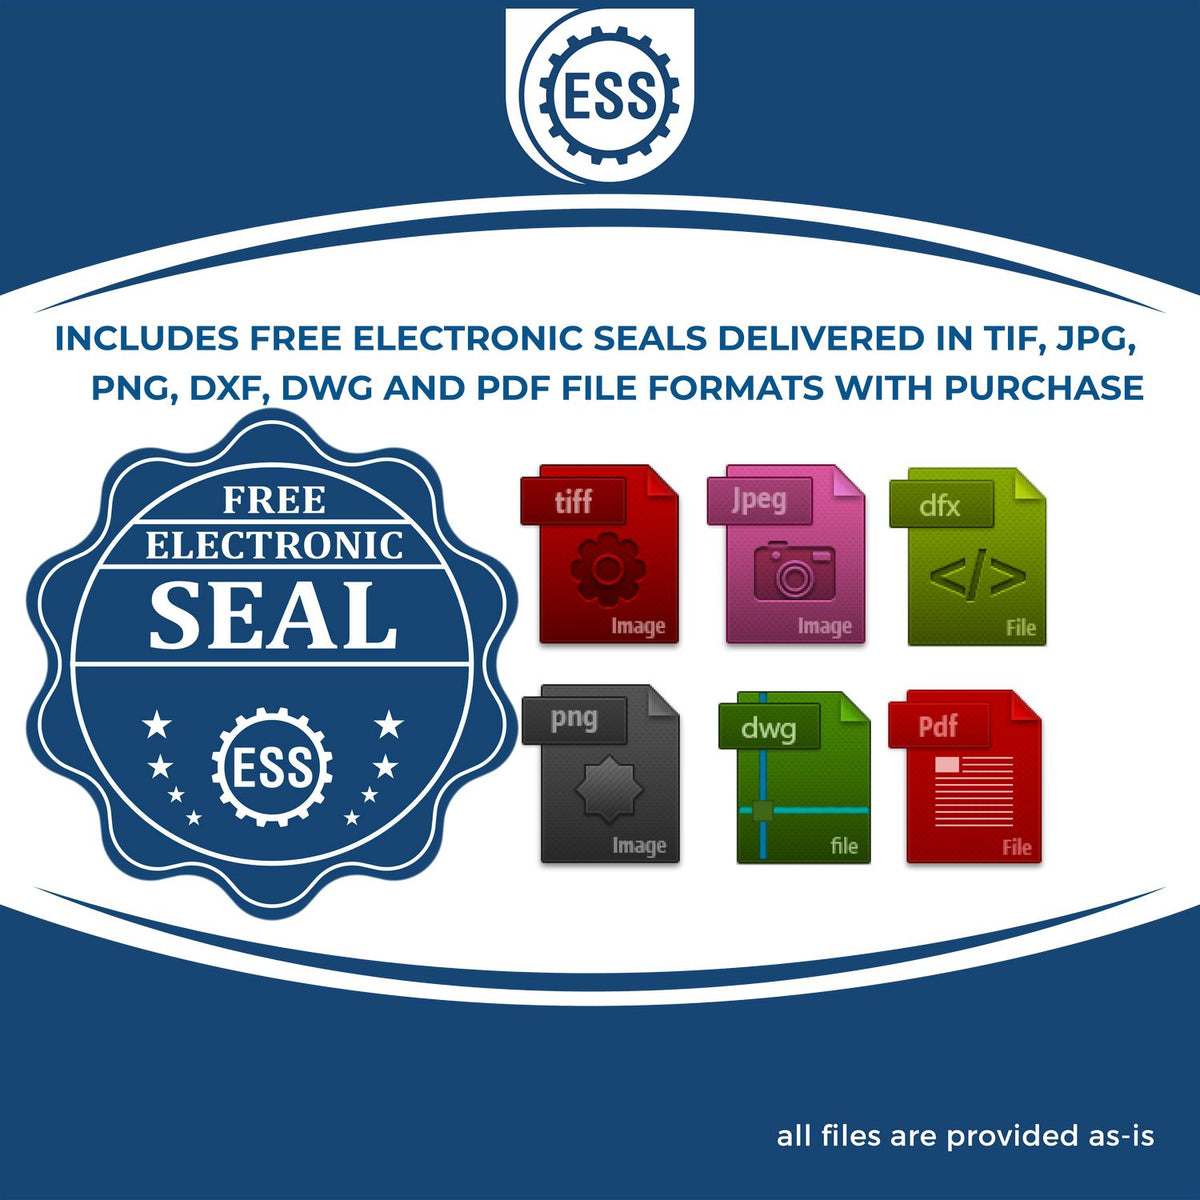 An infographic for the free electronic seal for the Slim Pre-Inked Delaware Land Surveyor Seal Stamp illustrating the different file type icons such as DXF, DWG, TIF, JPG and PNG.